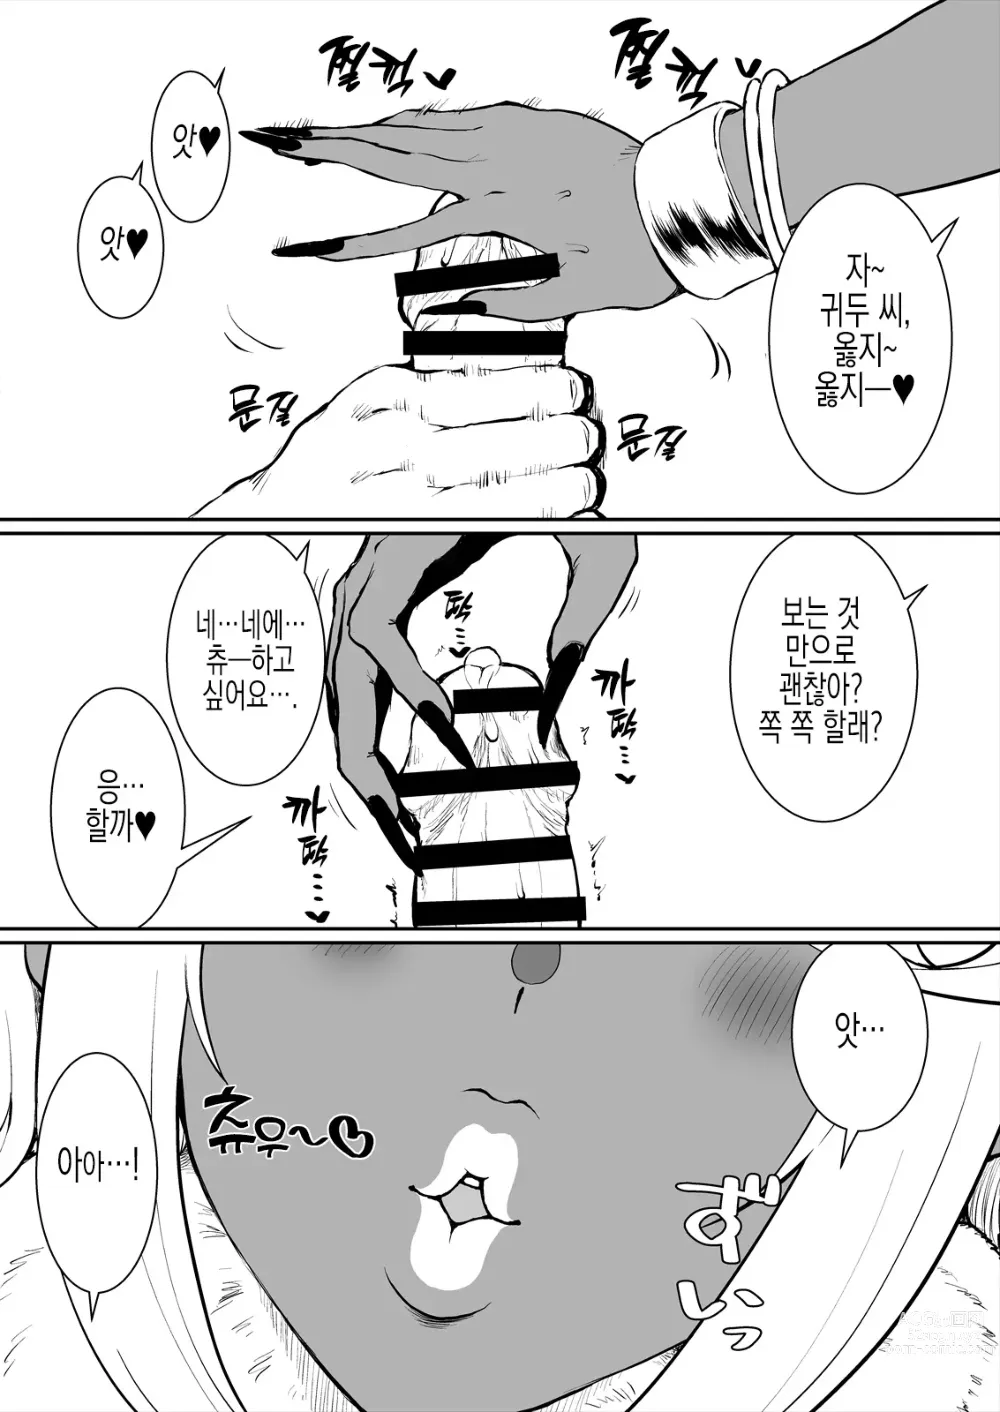 Page 6 of doujinshi 갸루 호무